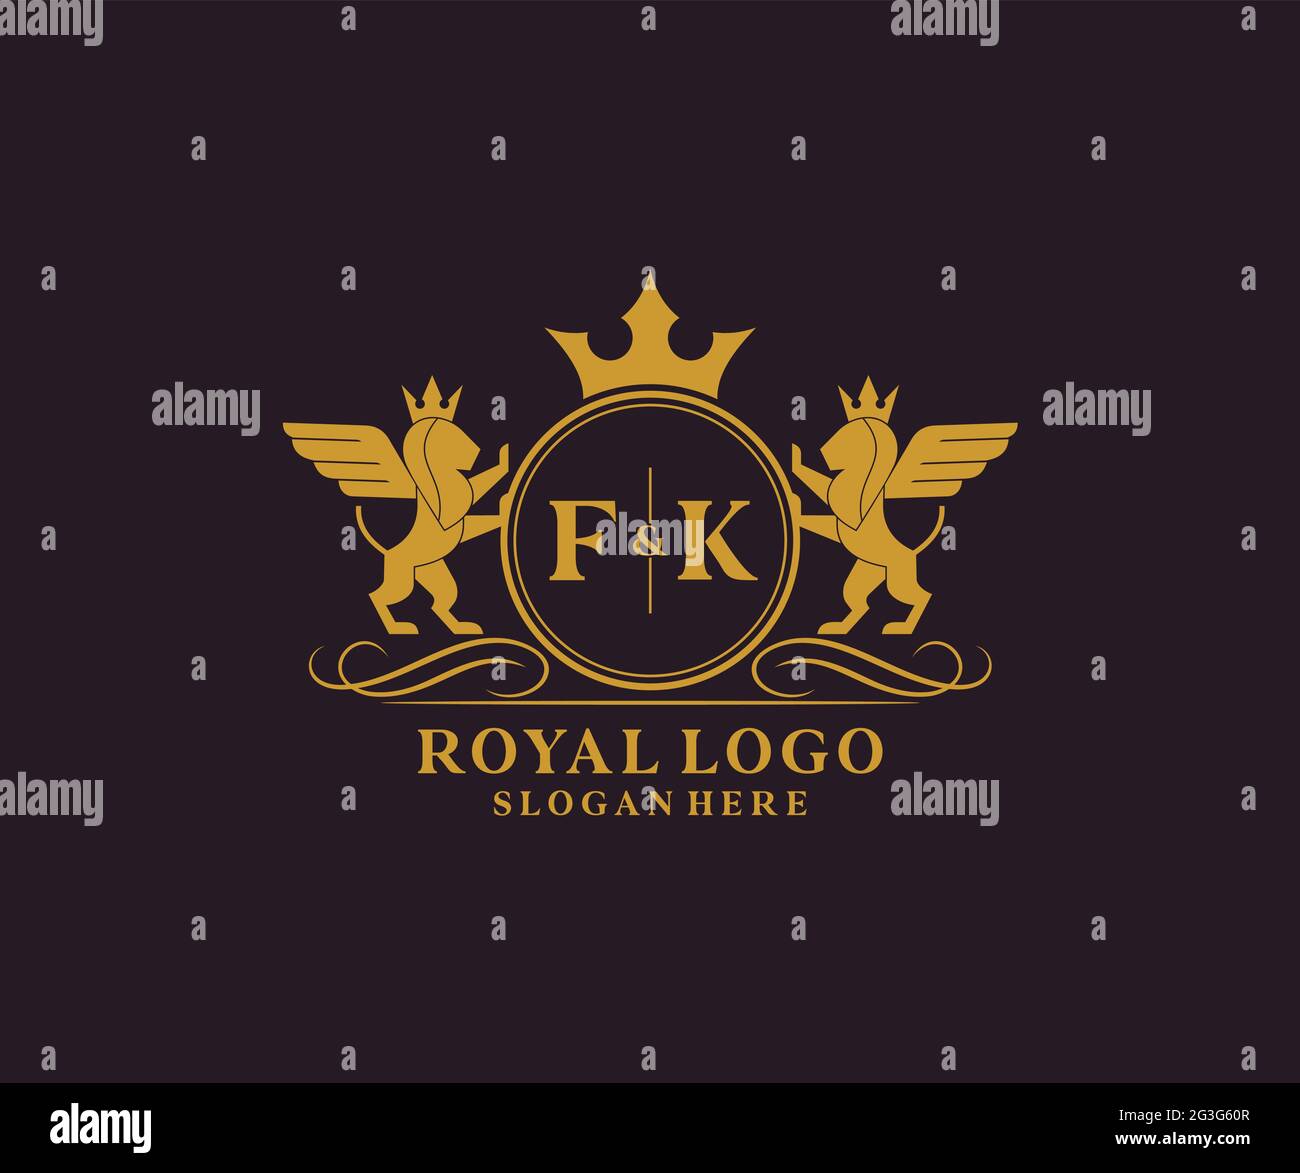 FK Letter Lion Royal Luxury Heraldic,Crest Logo template in vector art for Restaurant, Royalty, Boutique, Cafe, Hotel, Heraldic, Jewelry, Fashion and Stock Vector